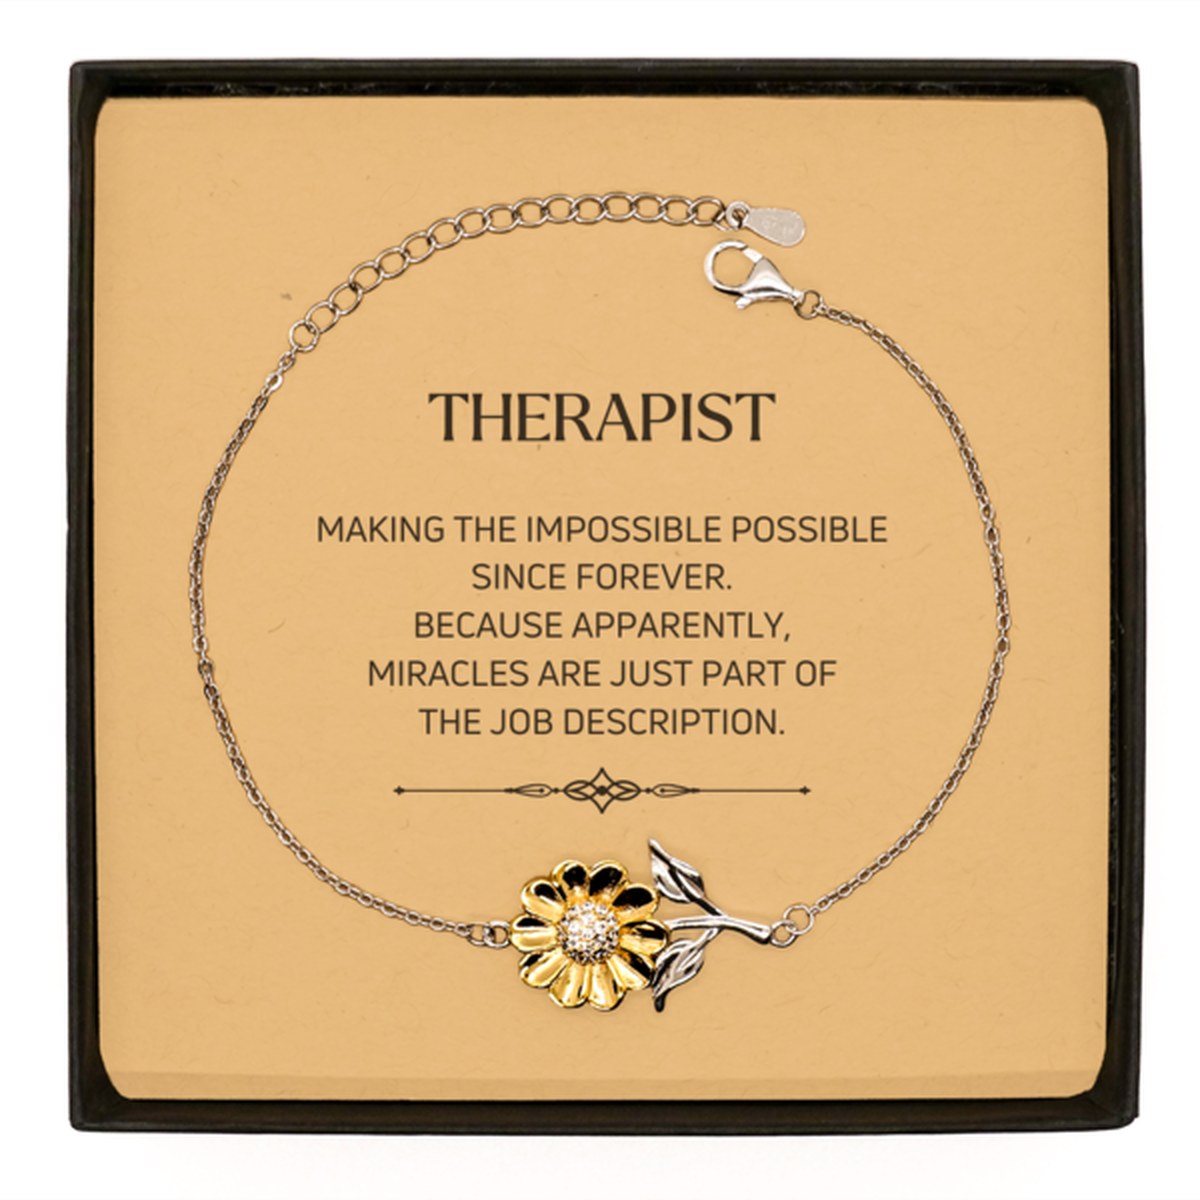 Funny Therapist Gifts, Miracles are just part of the job description, Inspirational Birthday Sunflower Bracelet For Therapist, Men, Women, Coworkers, Friends, Boss